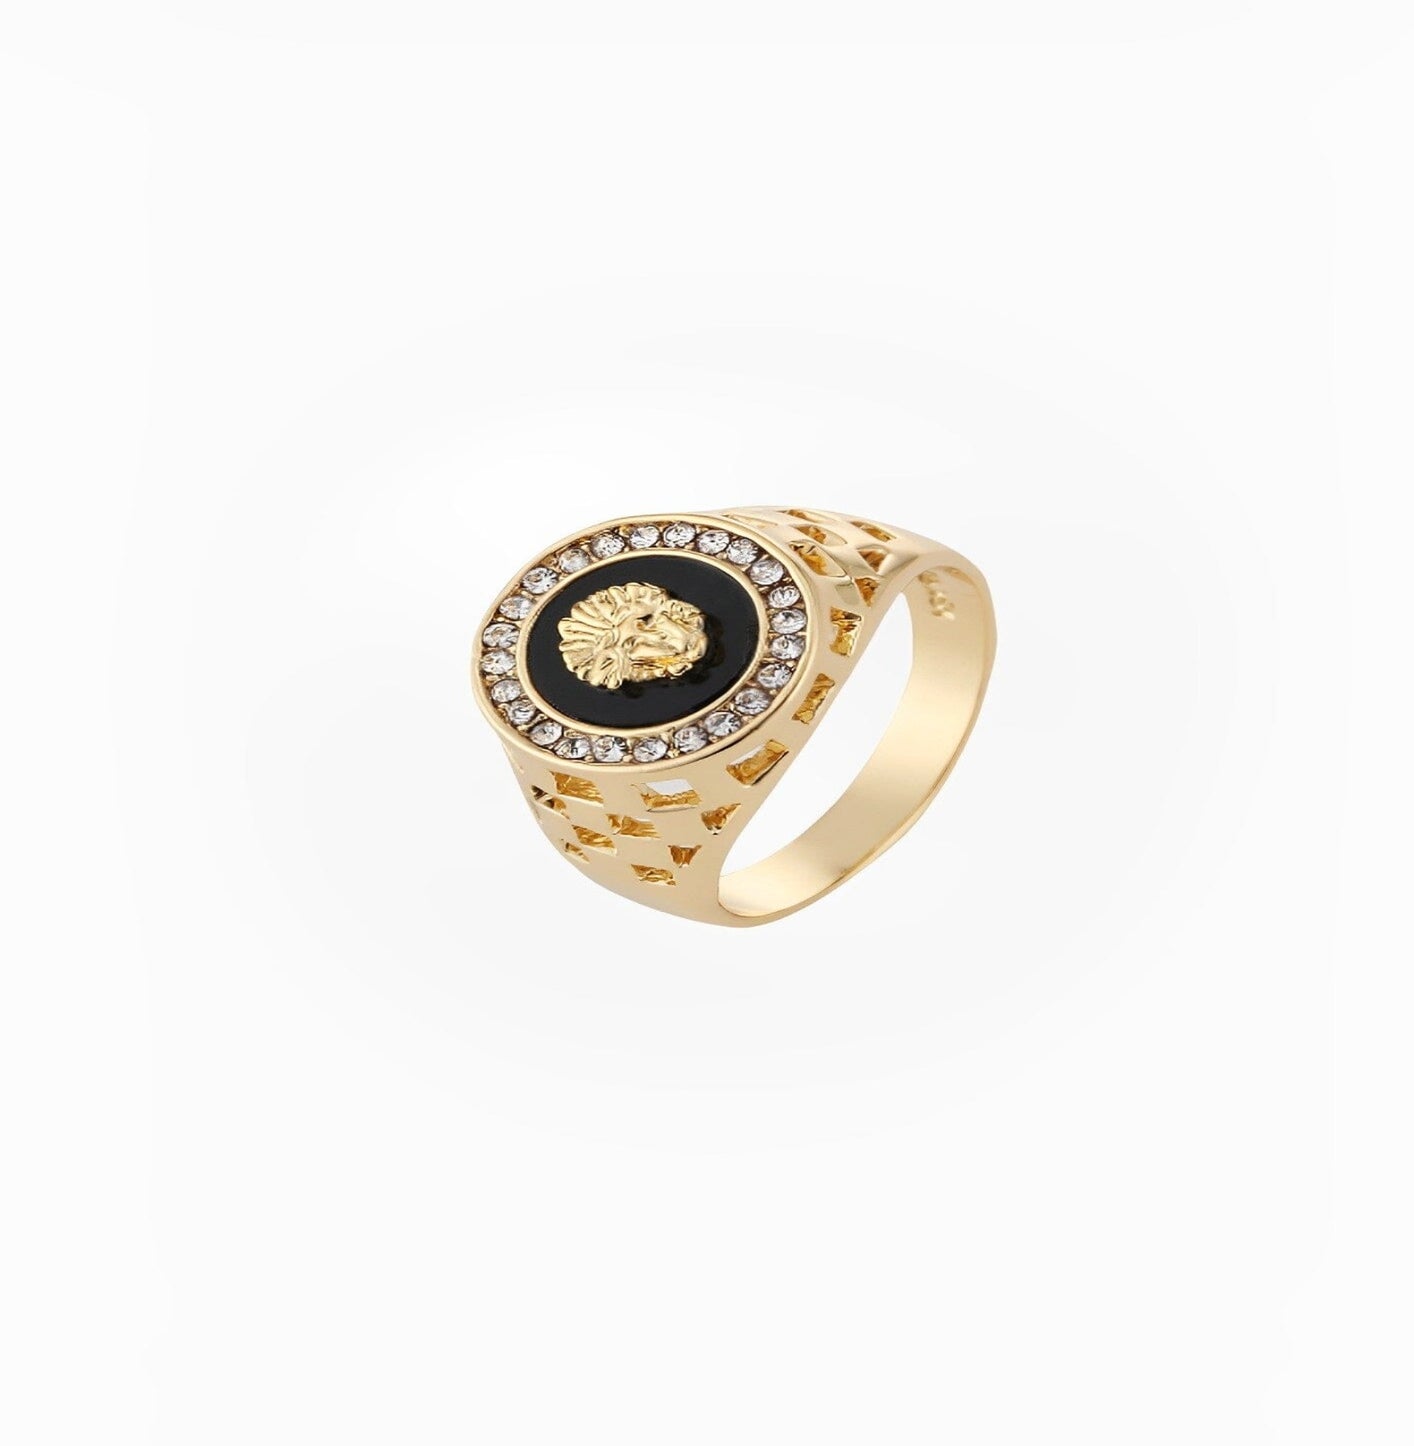 YADO RING ering Yubama Jewelry Online Store - The Elegant Designs of Gold and Silver ! 